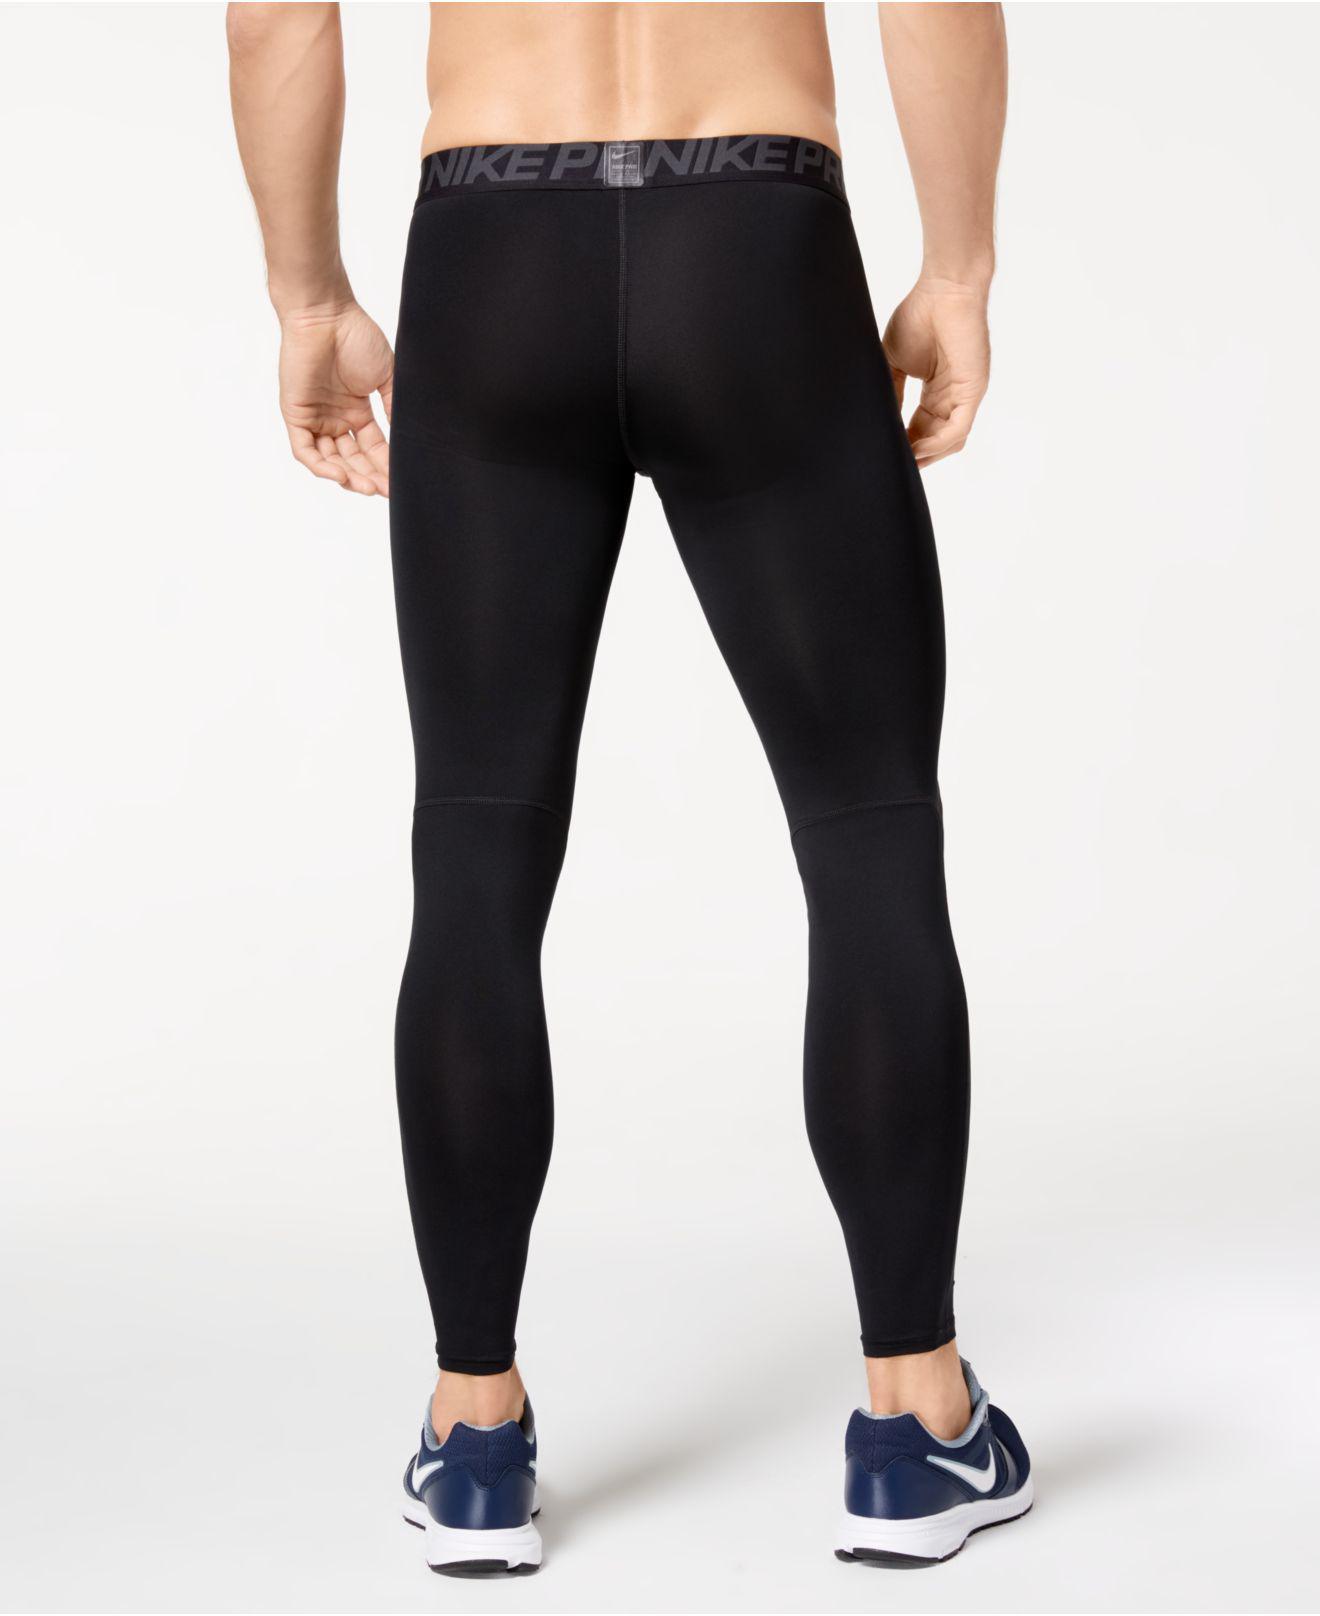 Nike Synthetic Pro Dri-fit Compression Tights in Black for Men - Lyst